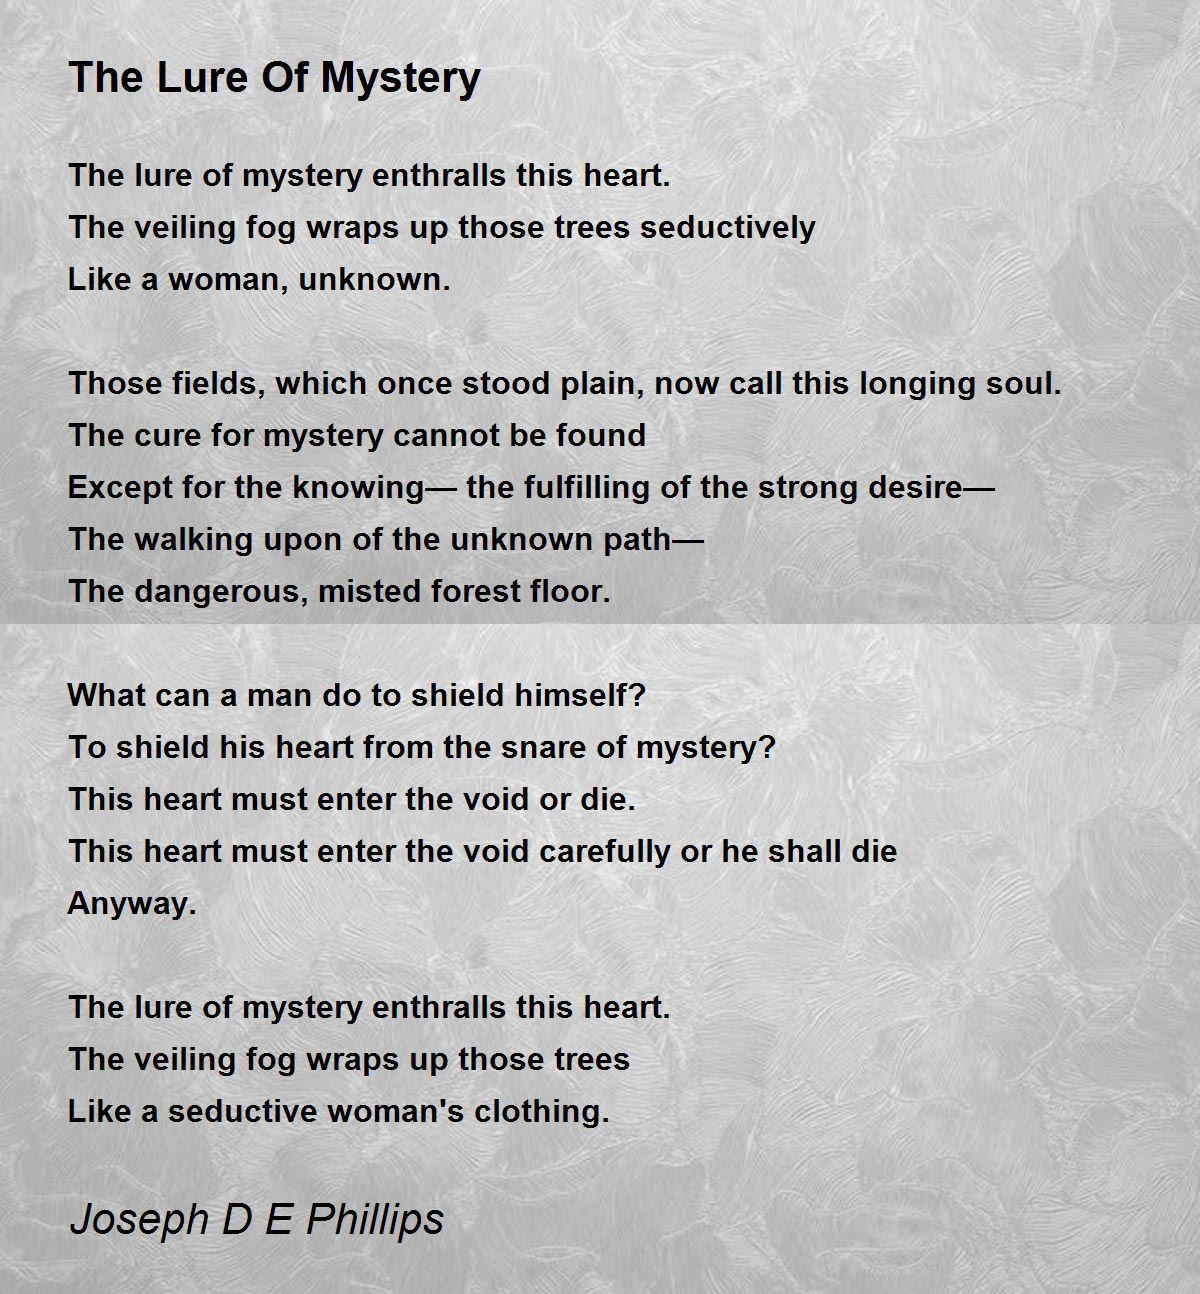 The Lure Of Mystery - The Lure Of Mystery Poem by Joseph D E Phillips